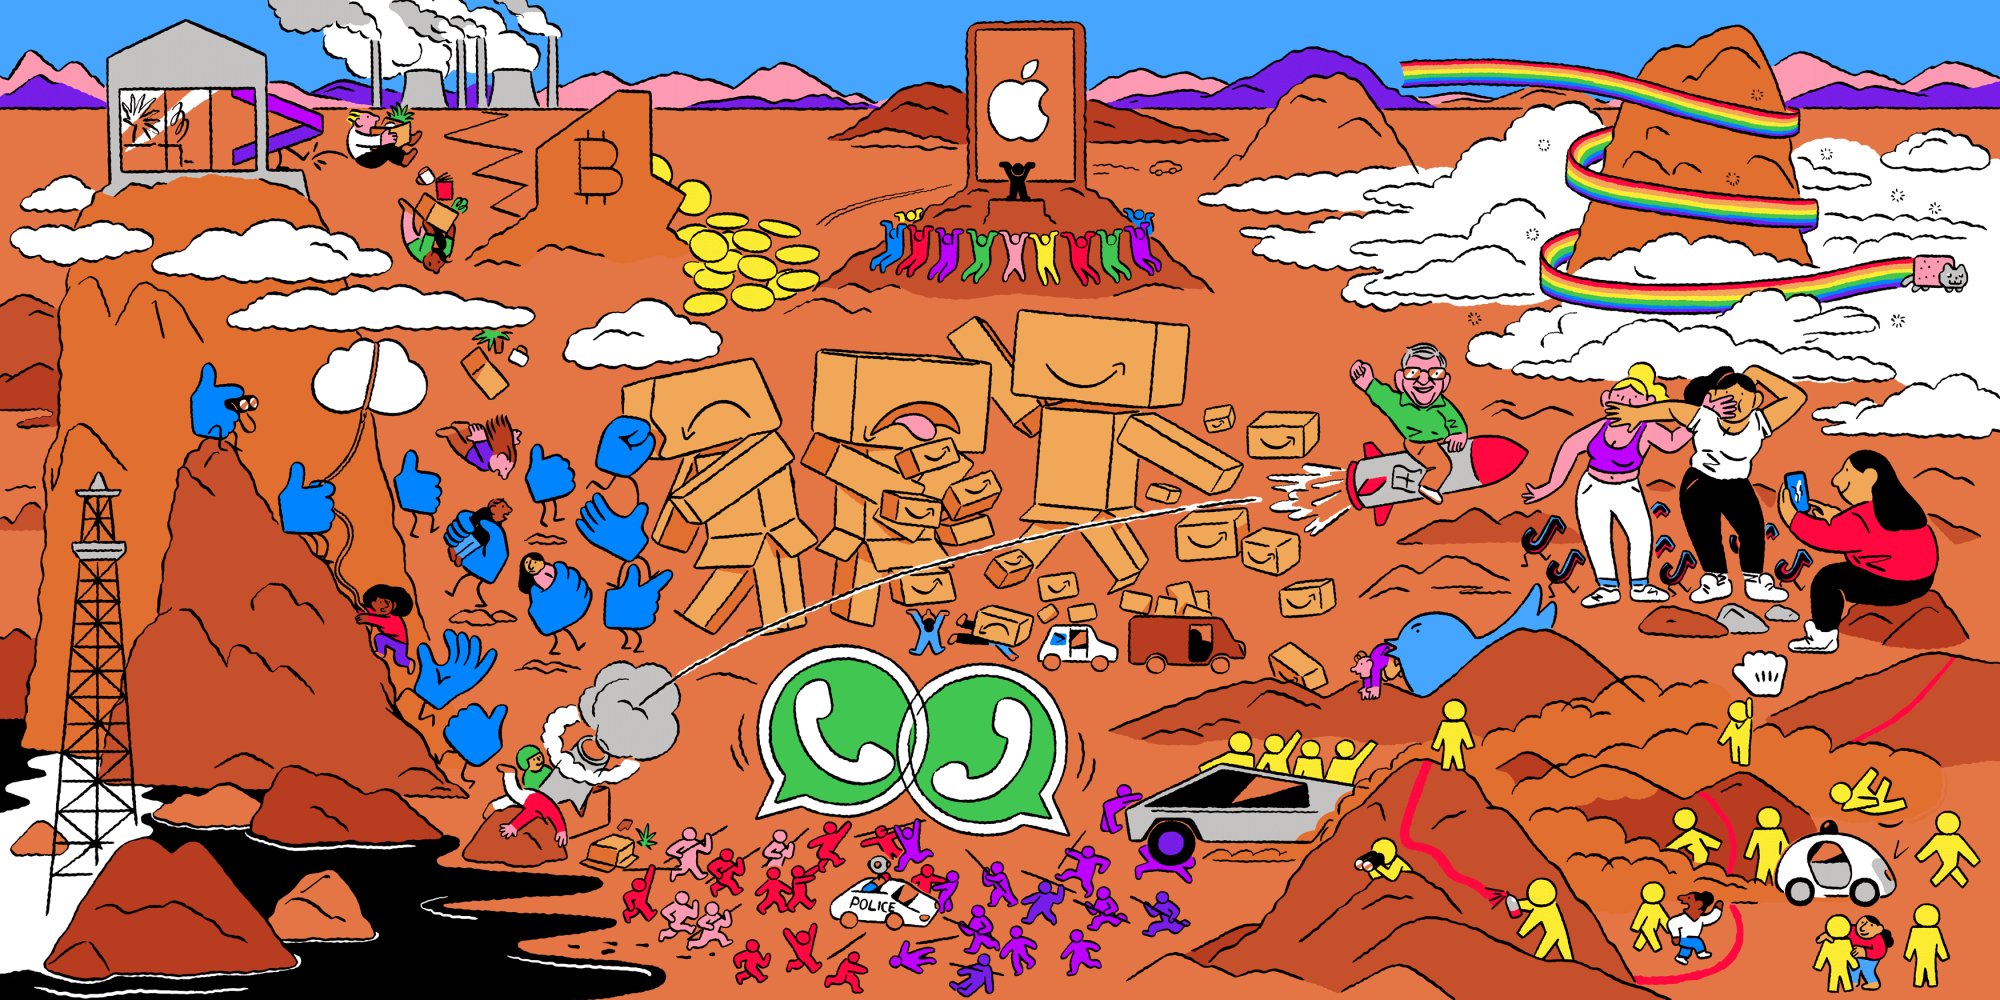 An illustration of lots of symbols of tech companies in a desert landscape